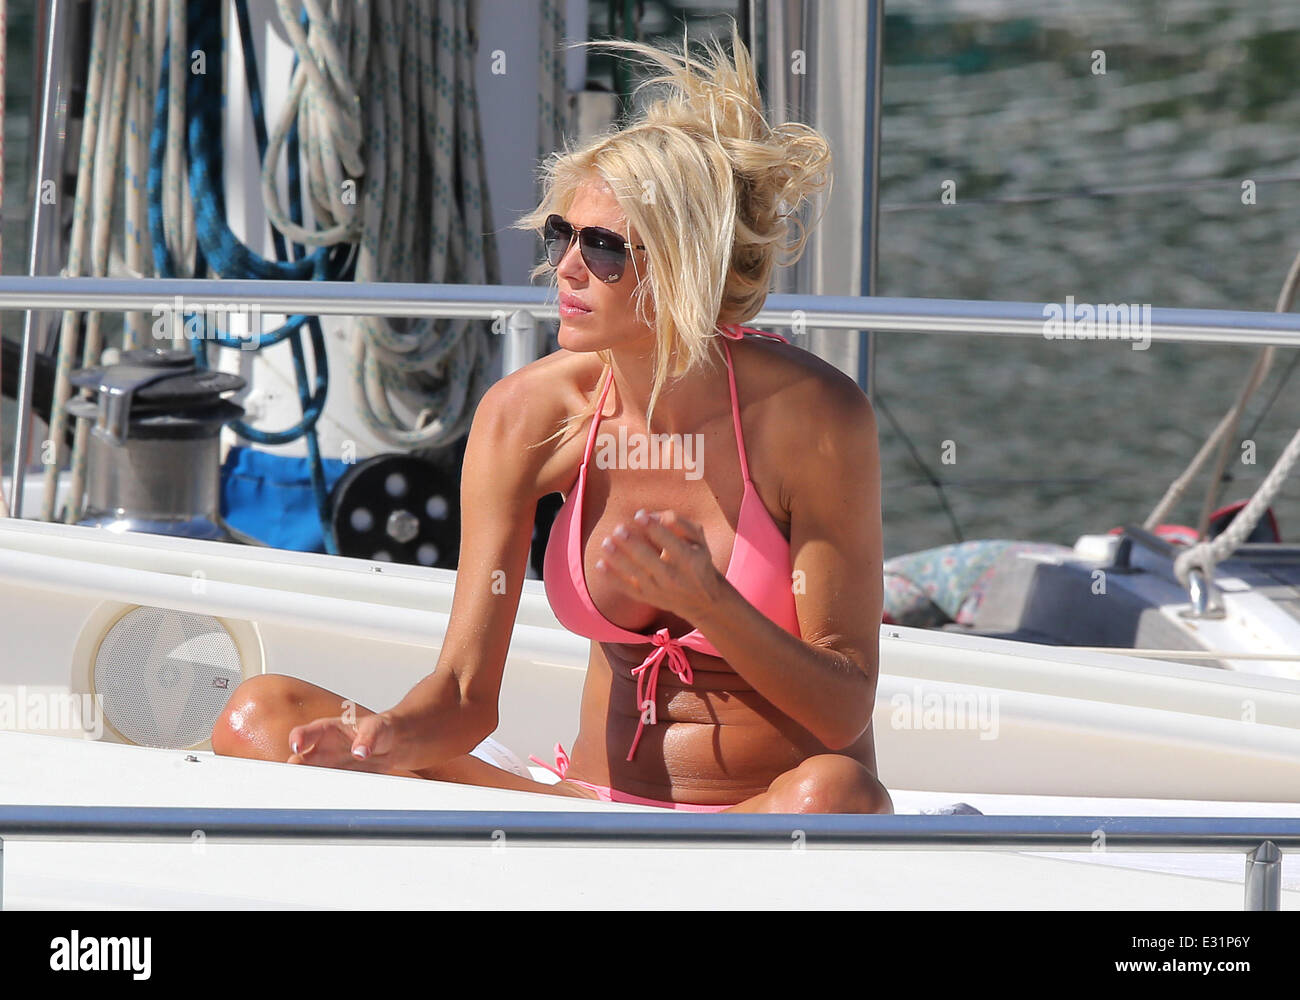 Victoria Silvstedt sunbathes on her yacht in the port of Beaulieu in the French Riviera  Featuring: Victoria Silvstedt Where: Be Stock Photo